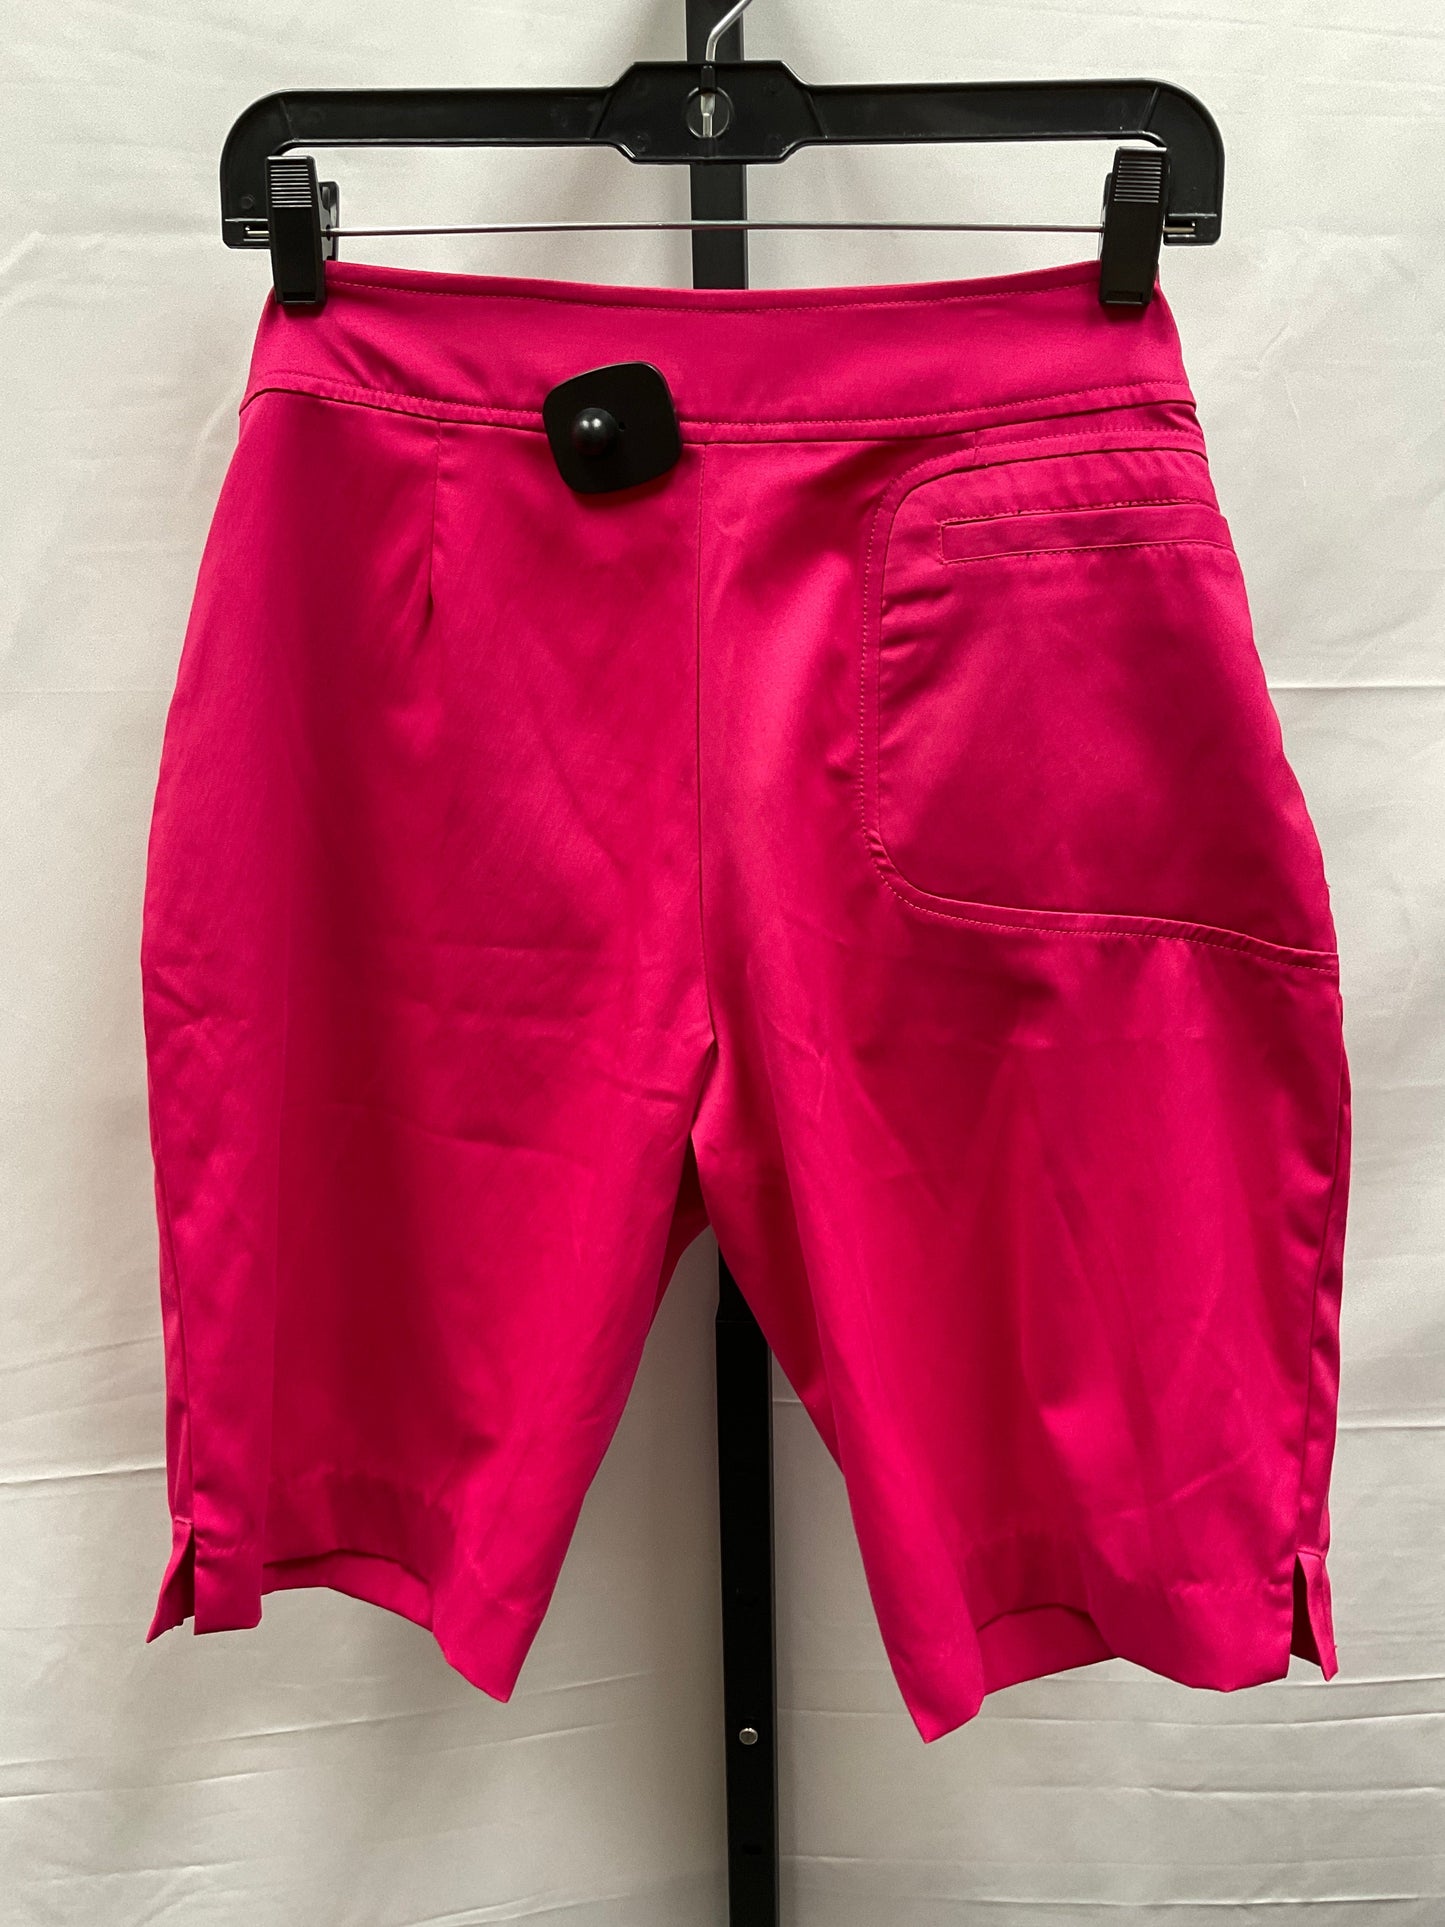 Pink Shorts Tail, Size 6